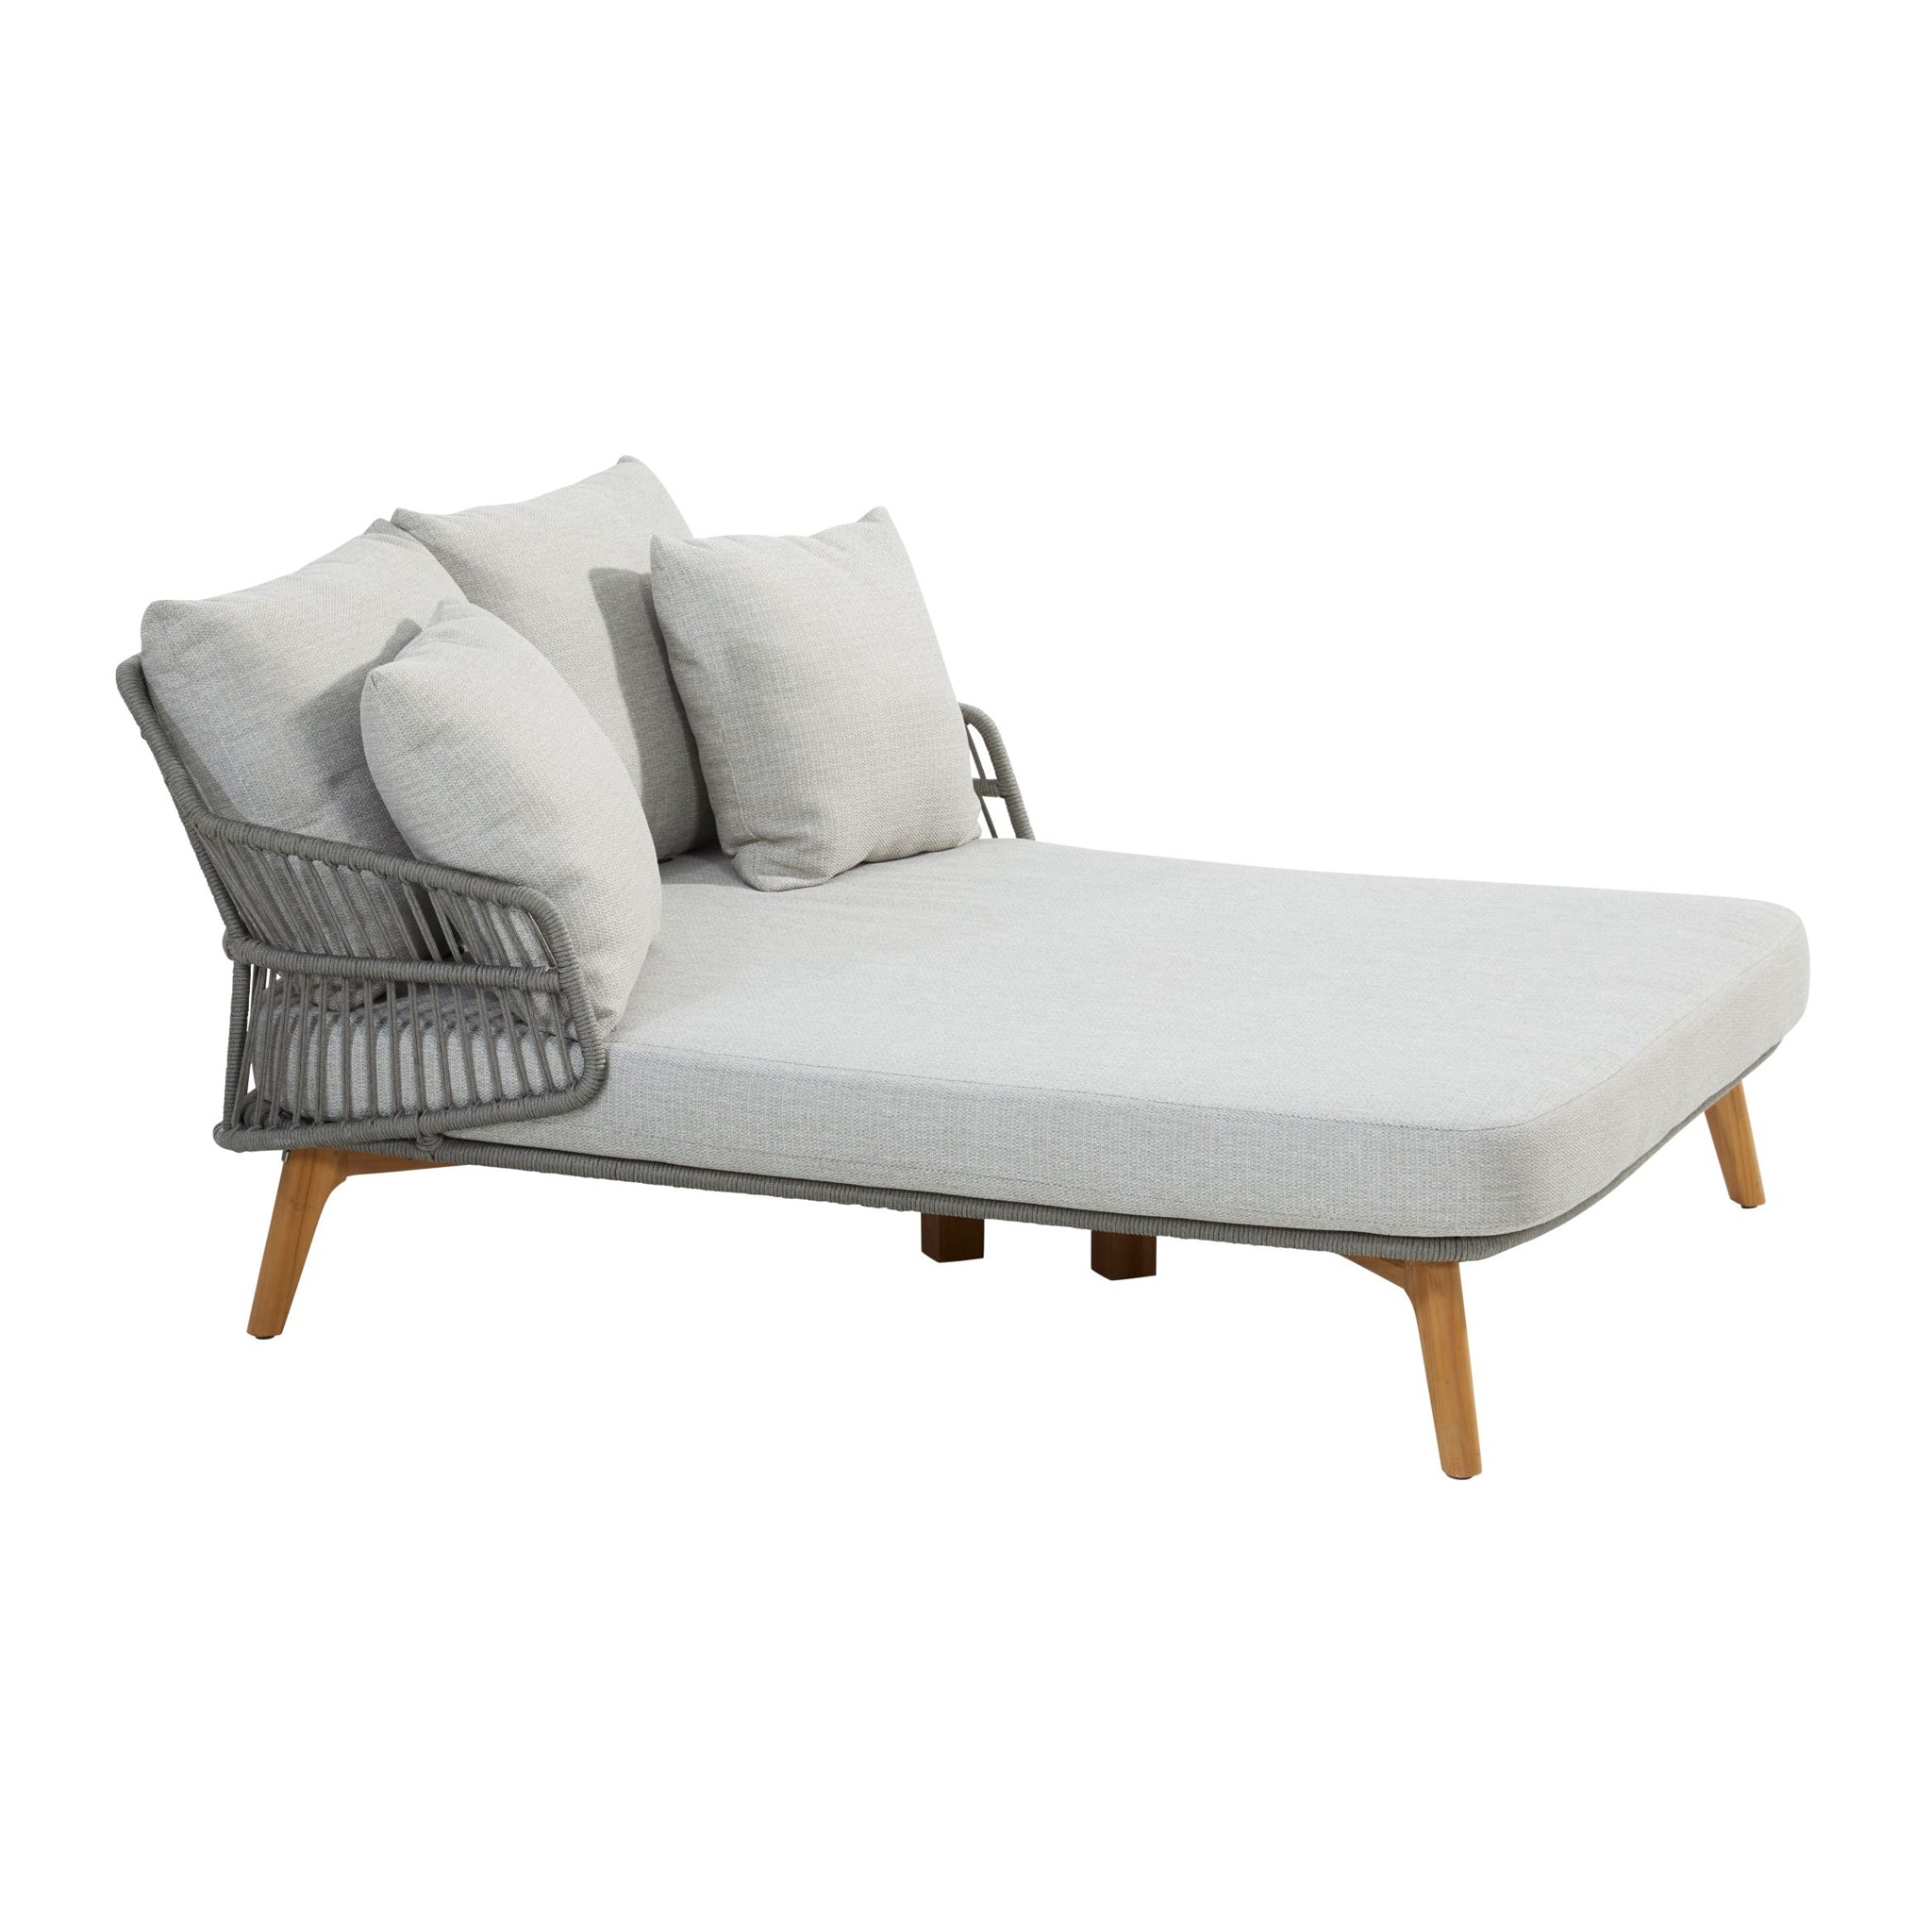 Sempre Double Lounger in Light Grey